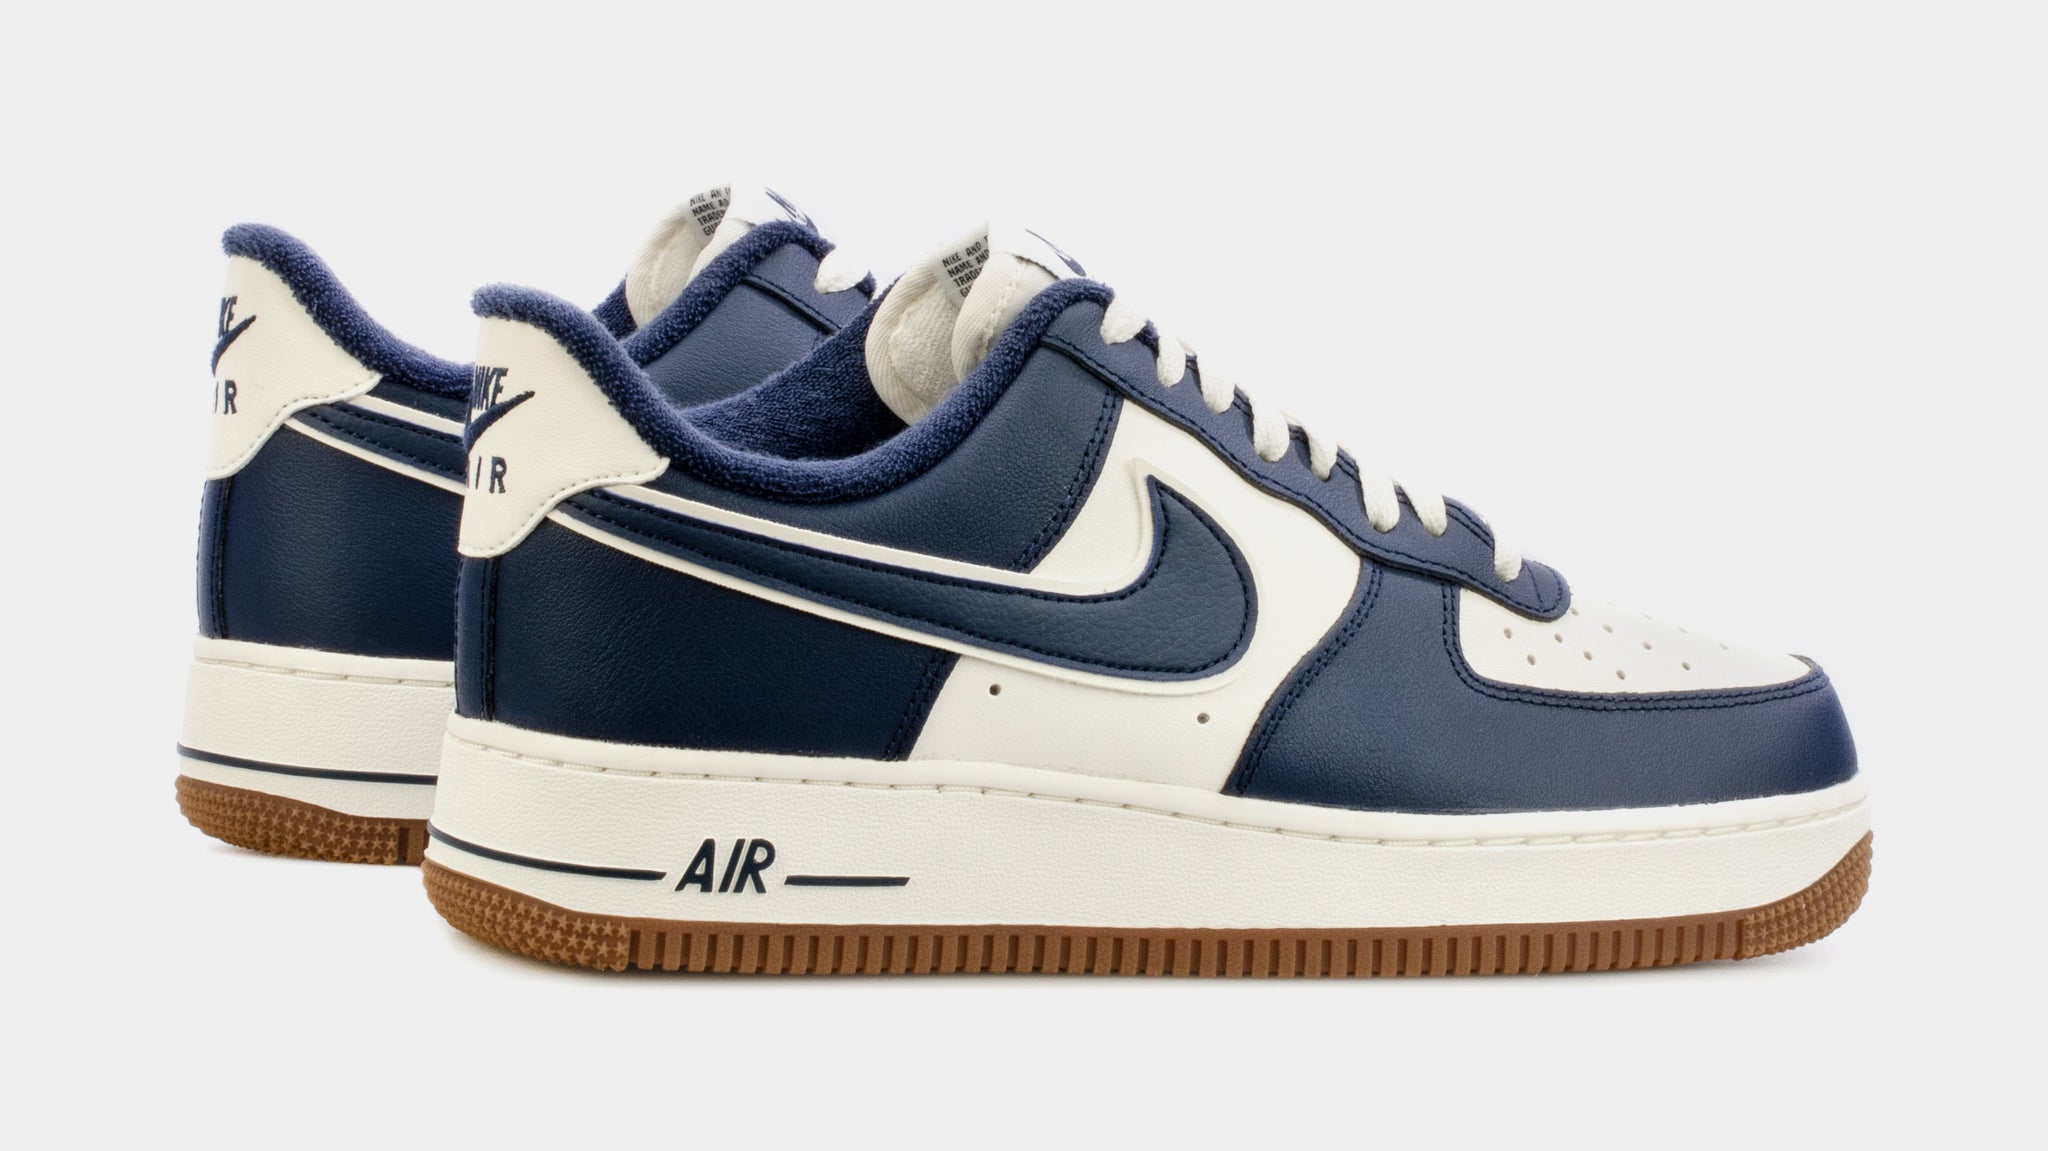 Nike Air Force 1 '07 sneakers in white and blue